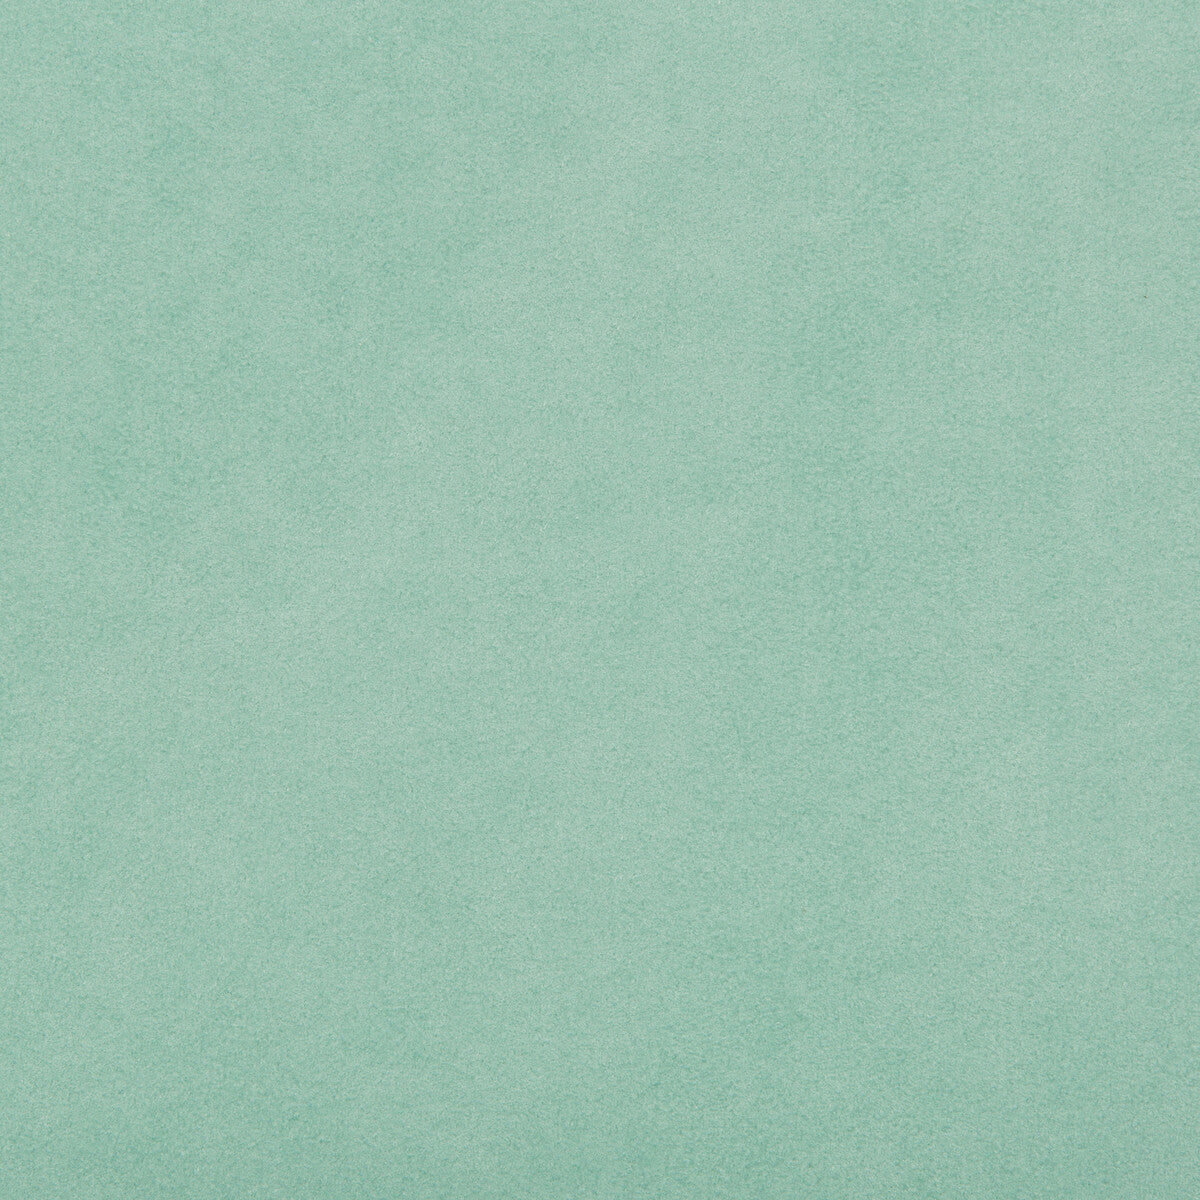 Ultimate fabric in seafoam color - pattern 960122.113.0 - by Lee Jofa in the Ultimate Suede collection